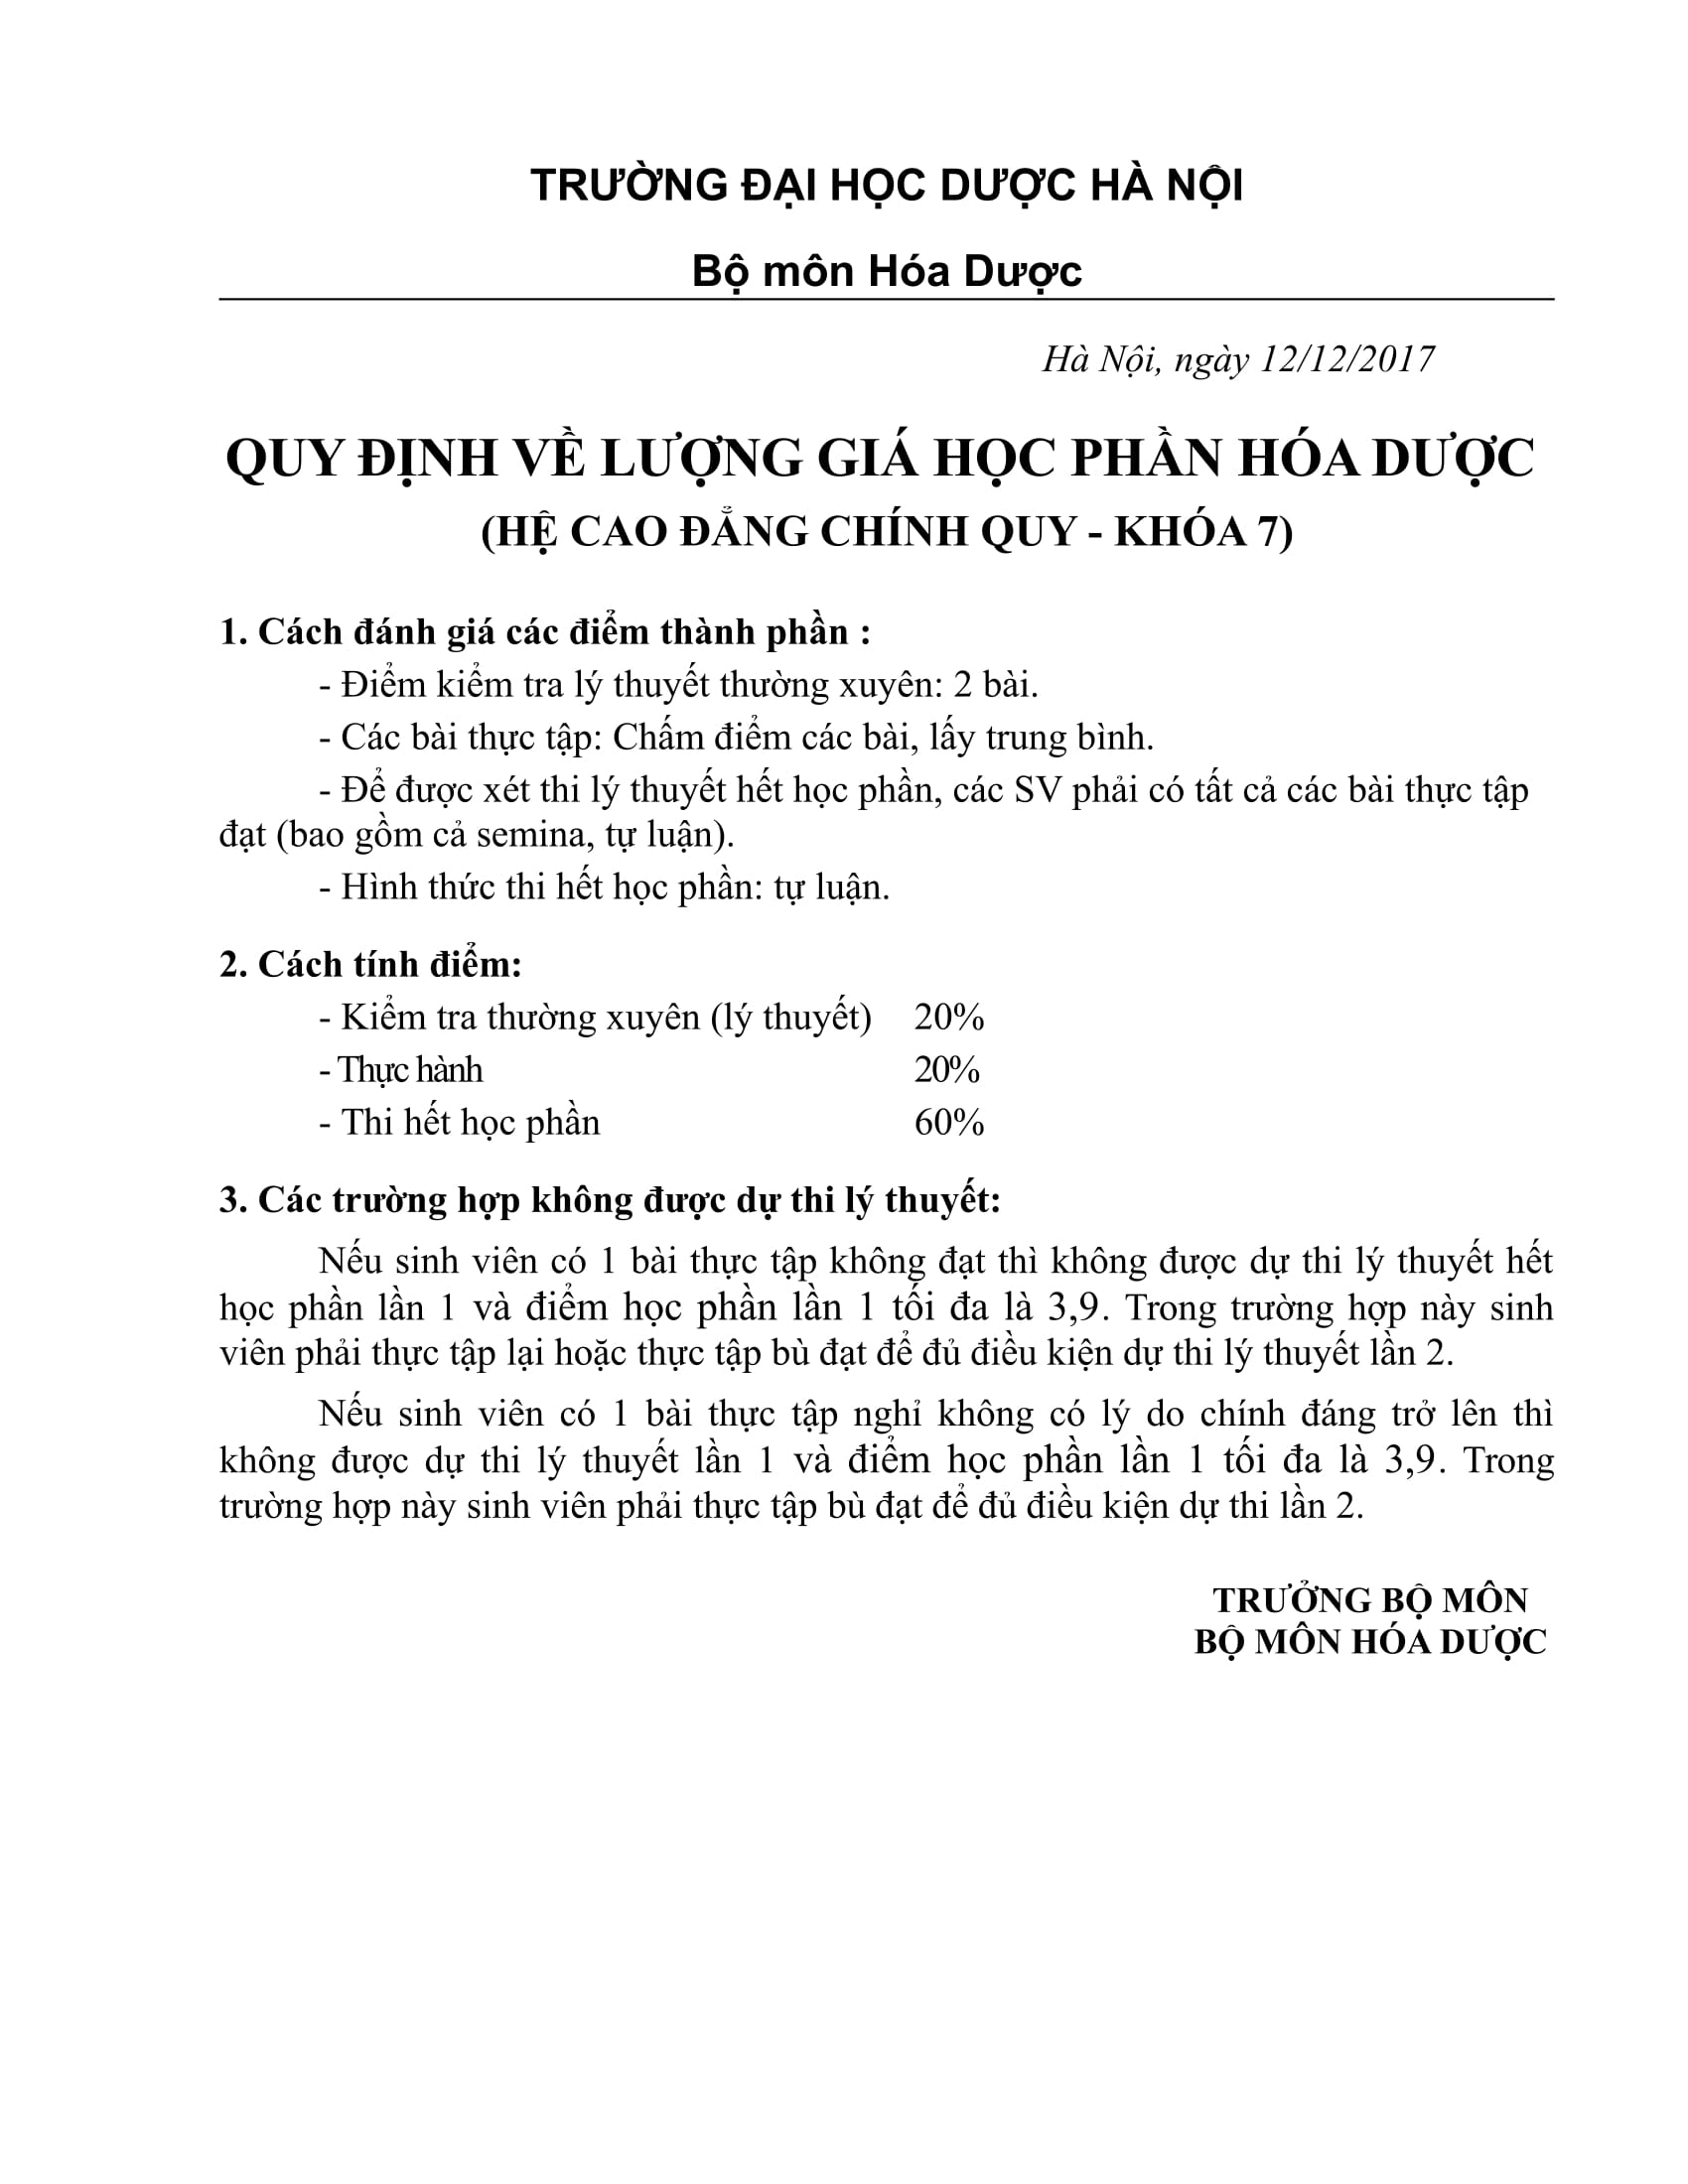 Quy dinh luong gia Cao dang chinh quy-1.jpg